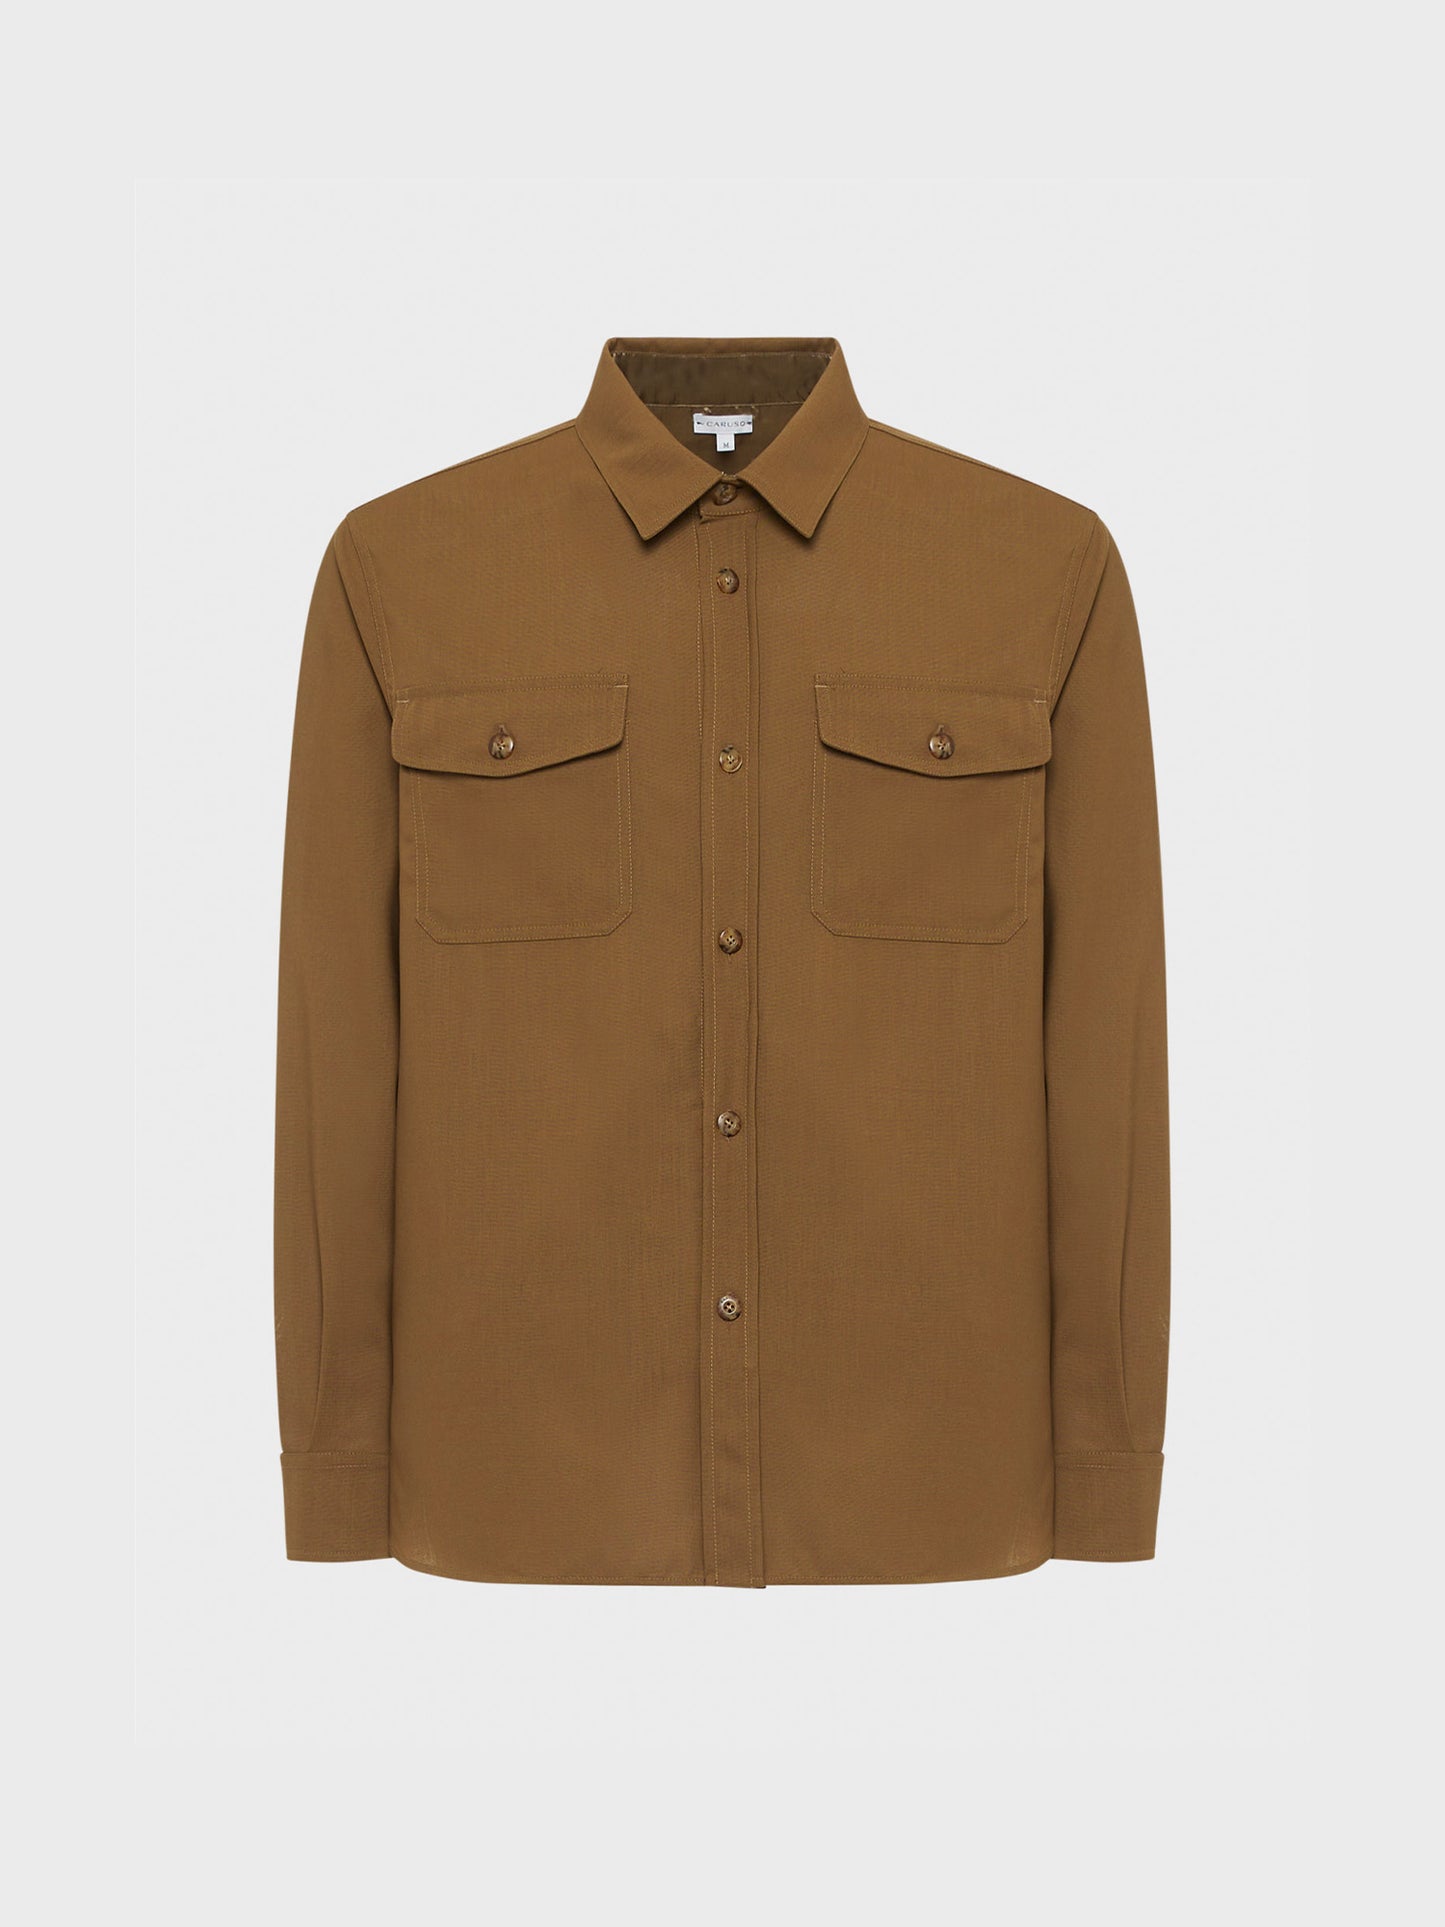 Overshirt in brown-colored "Houdini" tropical wool